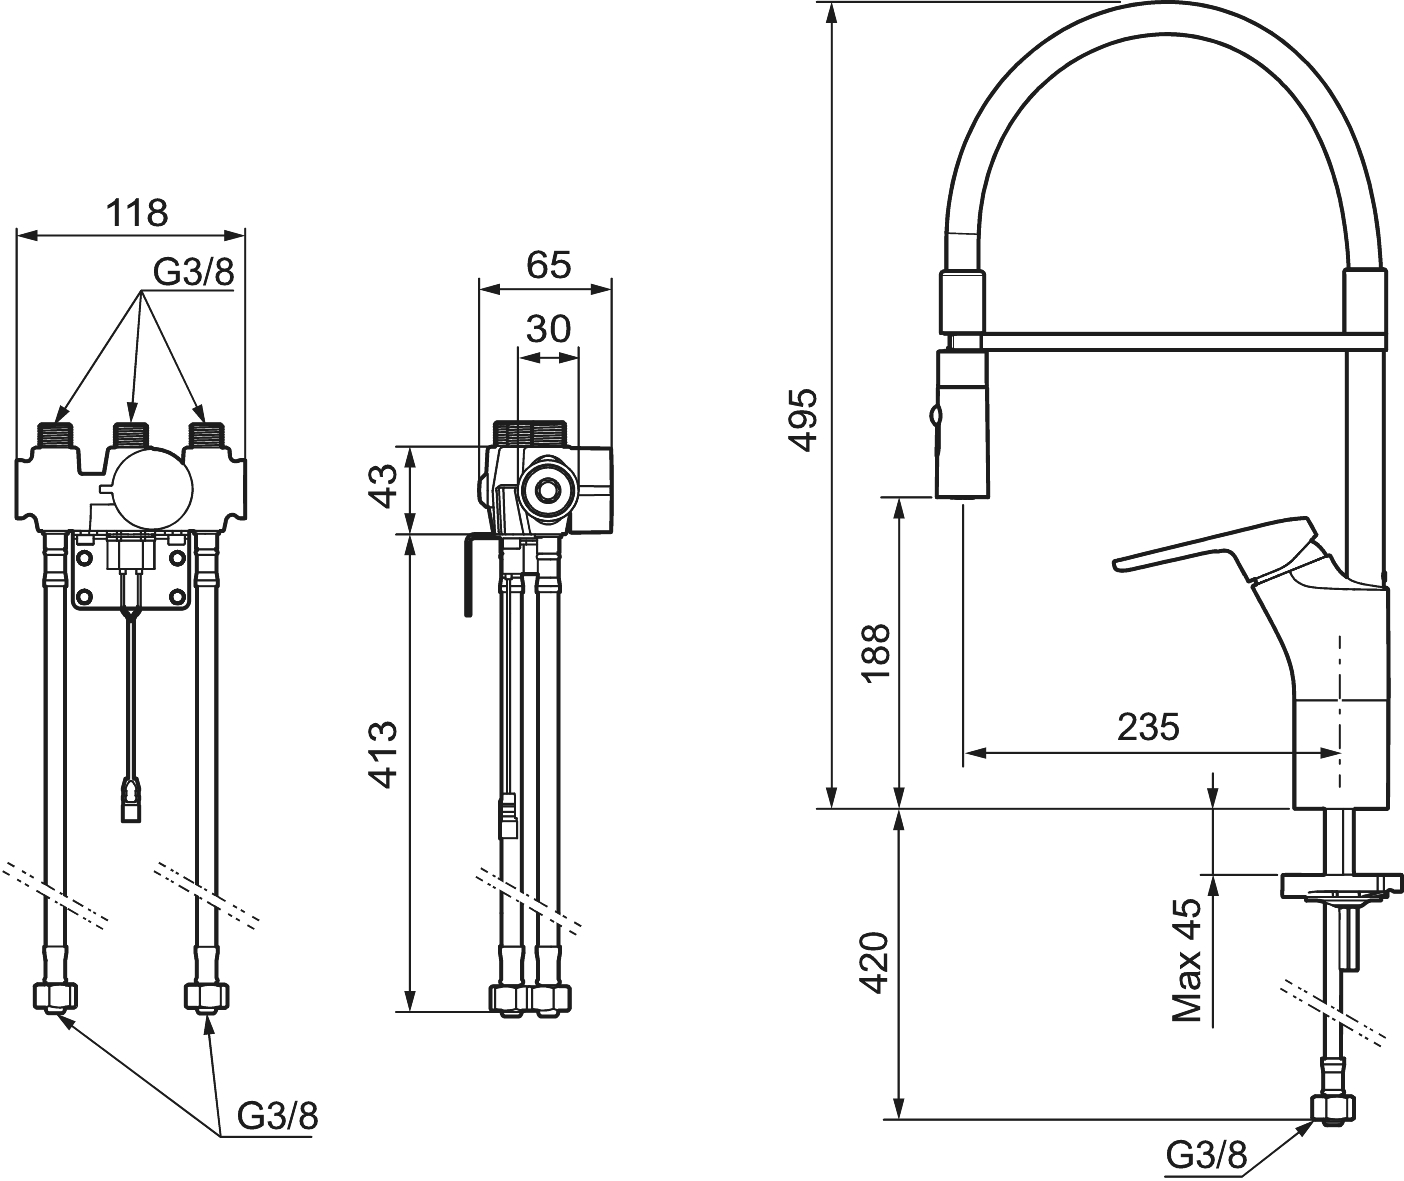 K8312-0010.png